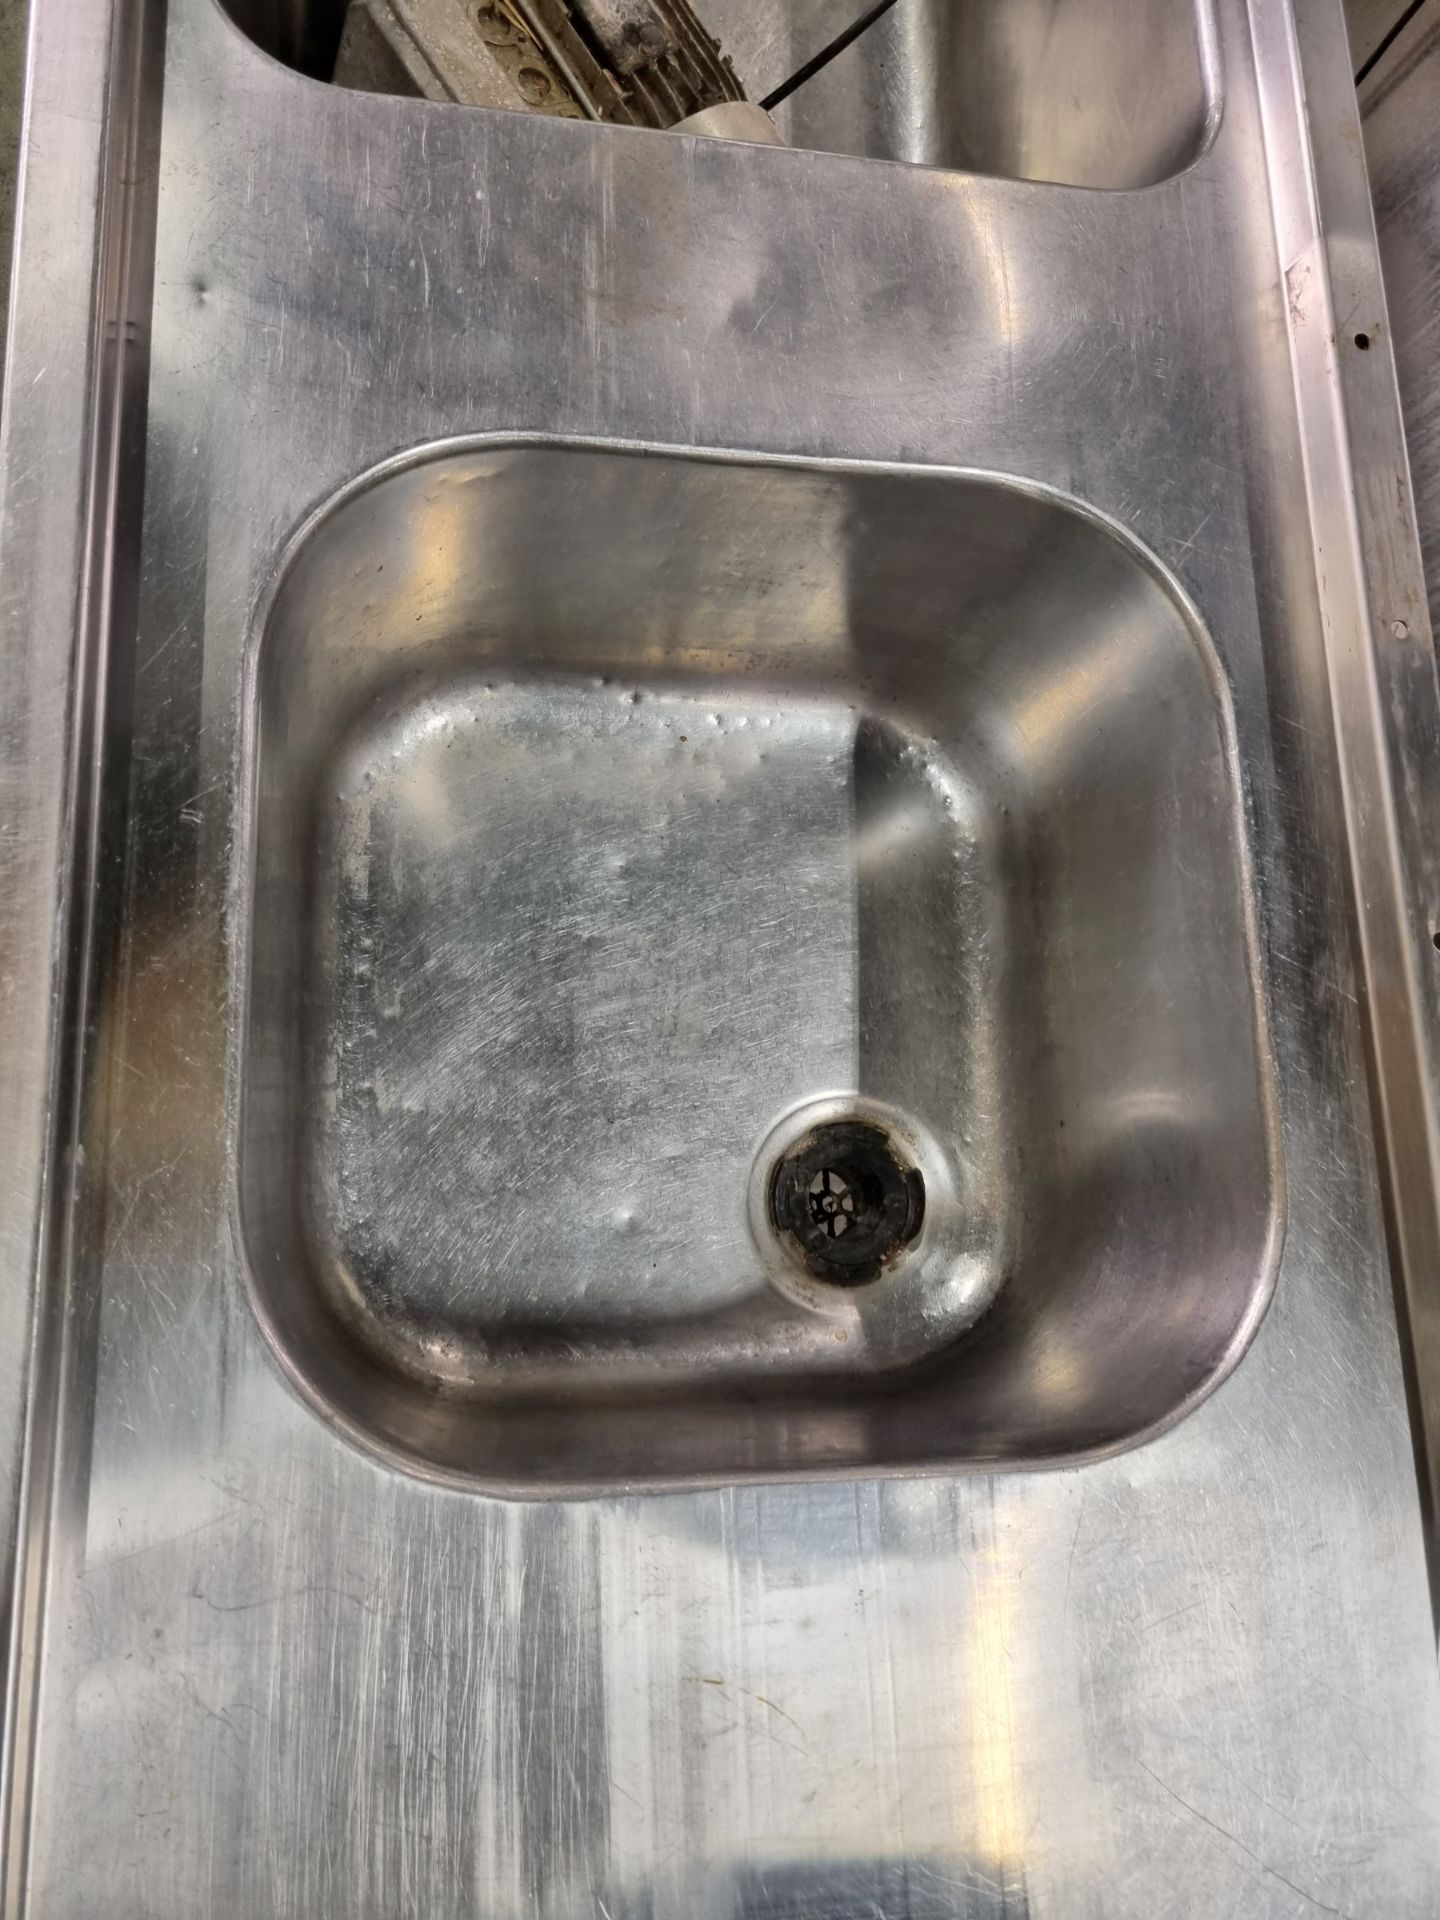 Stainless steel double sink unit with waste disposal shoot (5 pin connector for motor) - Image 4 of 7